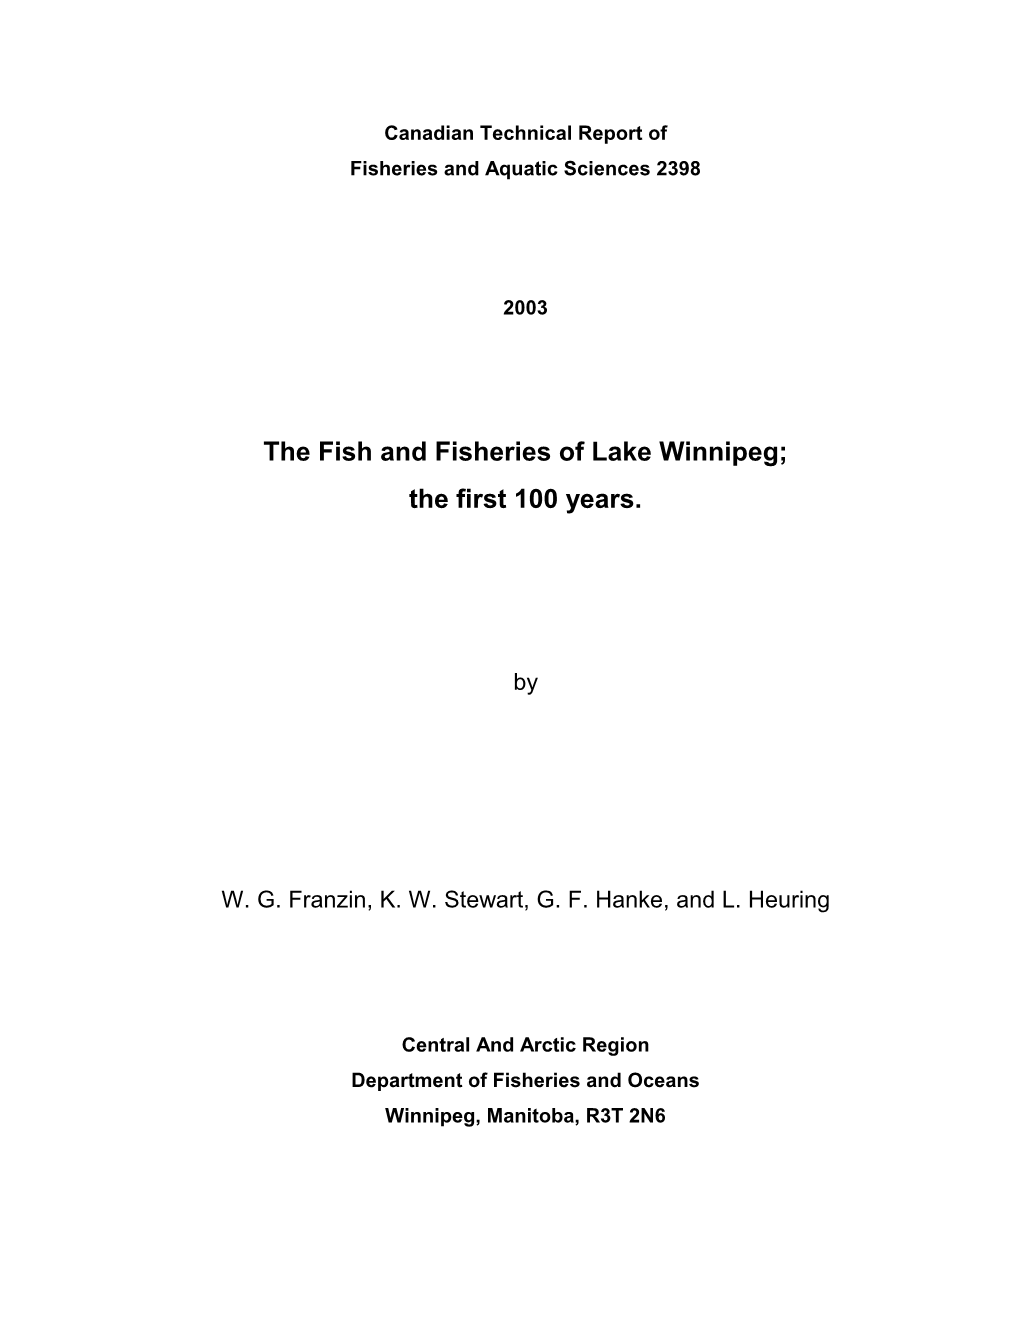 The Fish and Fisheries of Lake Winnipeg; the First 100 Years